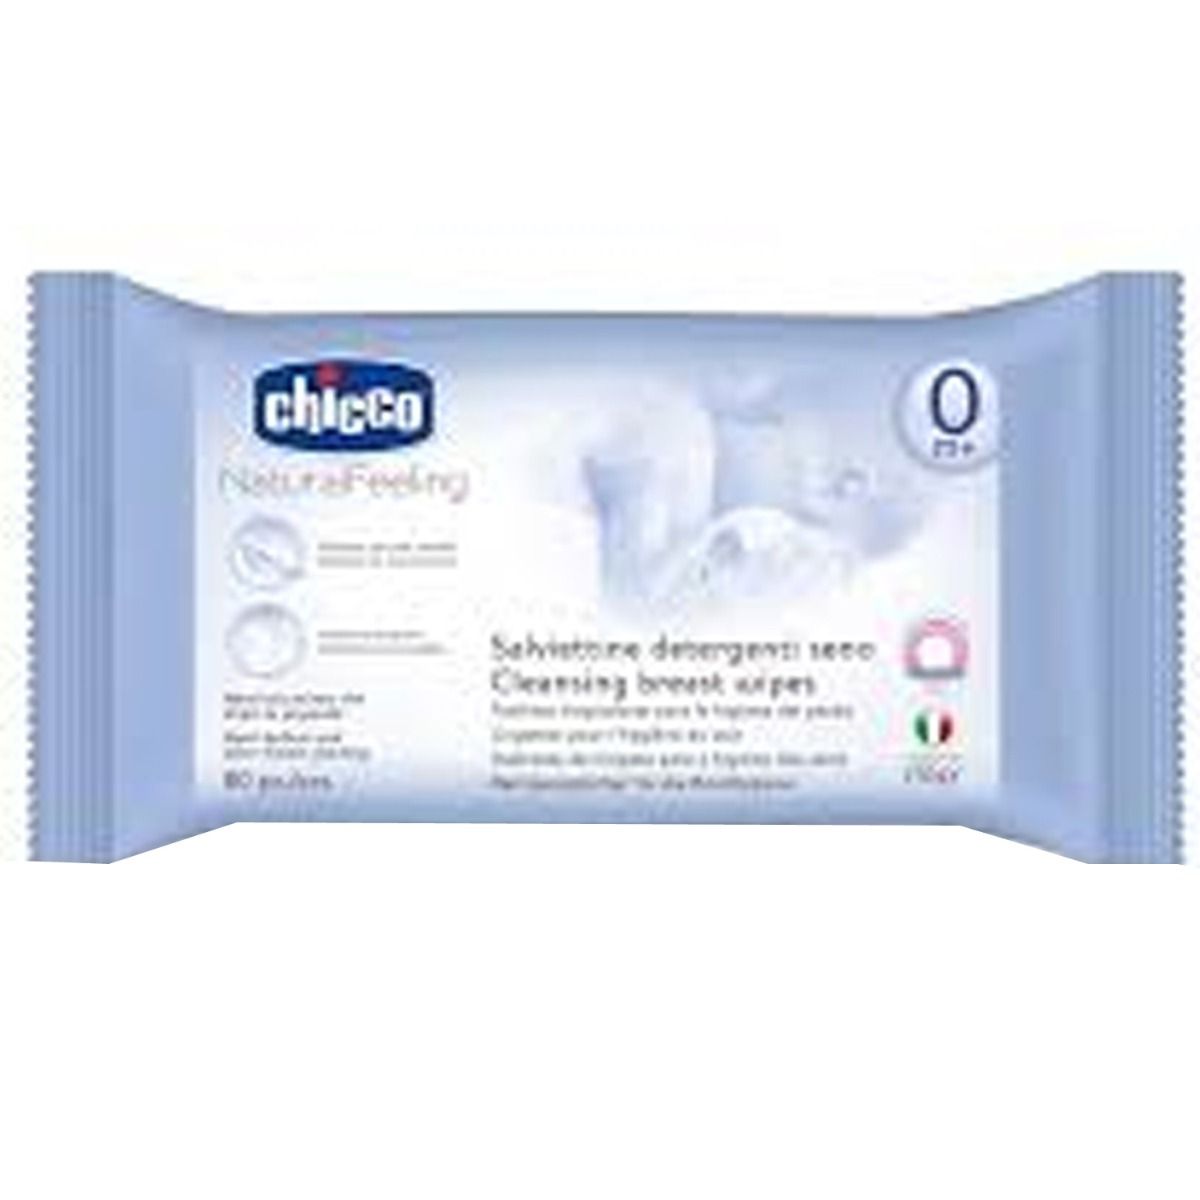 Chicco Natural Feeling Breast Cleansing Wipes, 80 Count, Pack of 1 